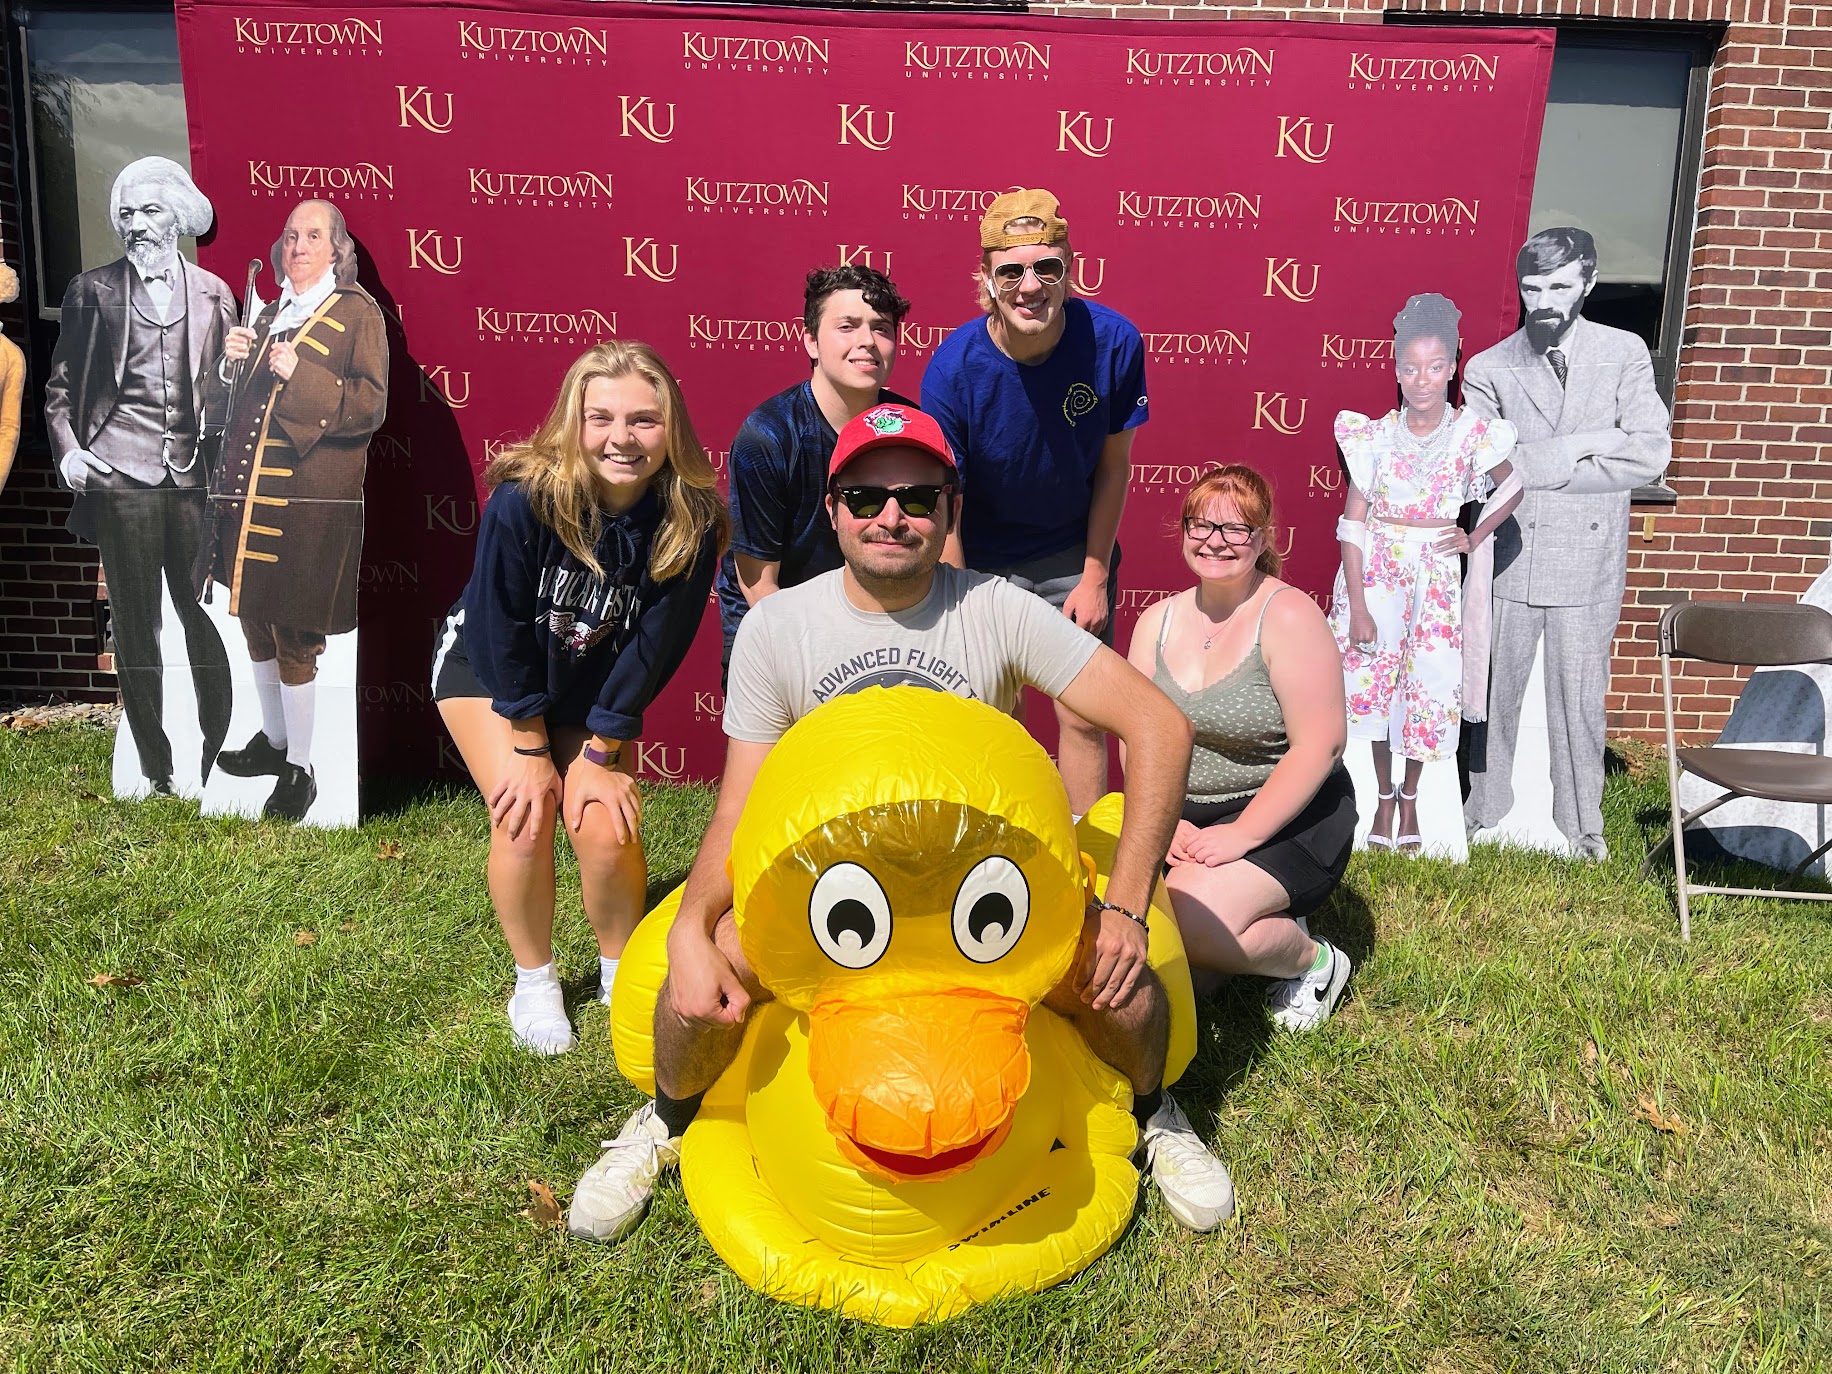 History club officers sitting on and standing around a large blow up duck